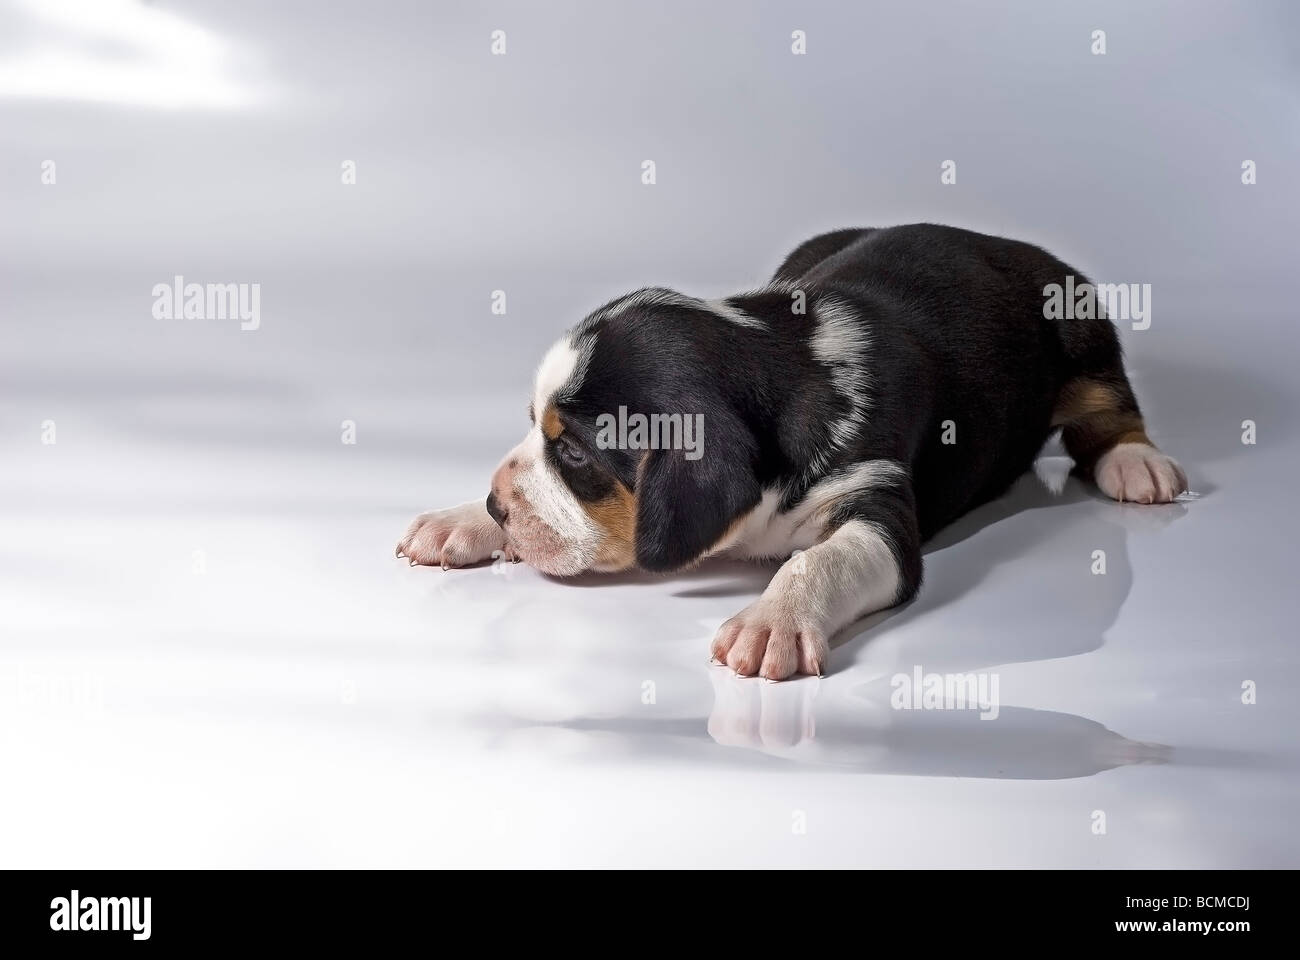 Timba. A 5 weeks old Finnish Hound. Stock Photo